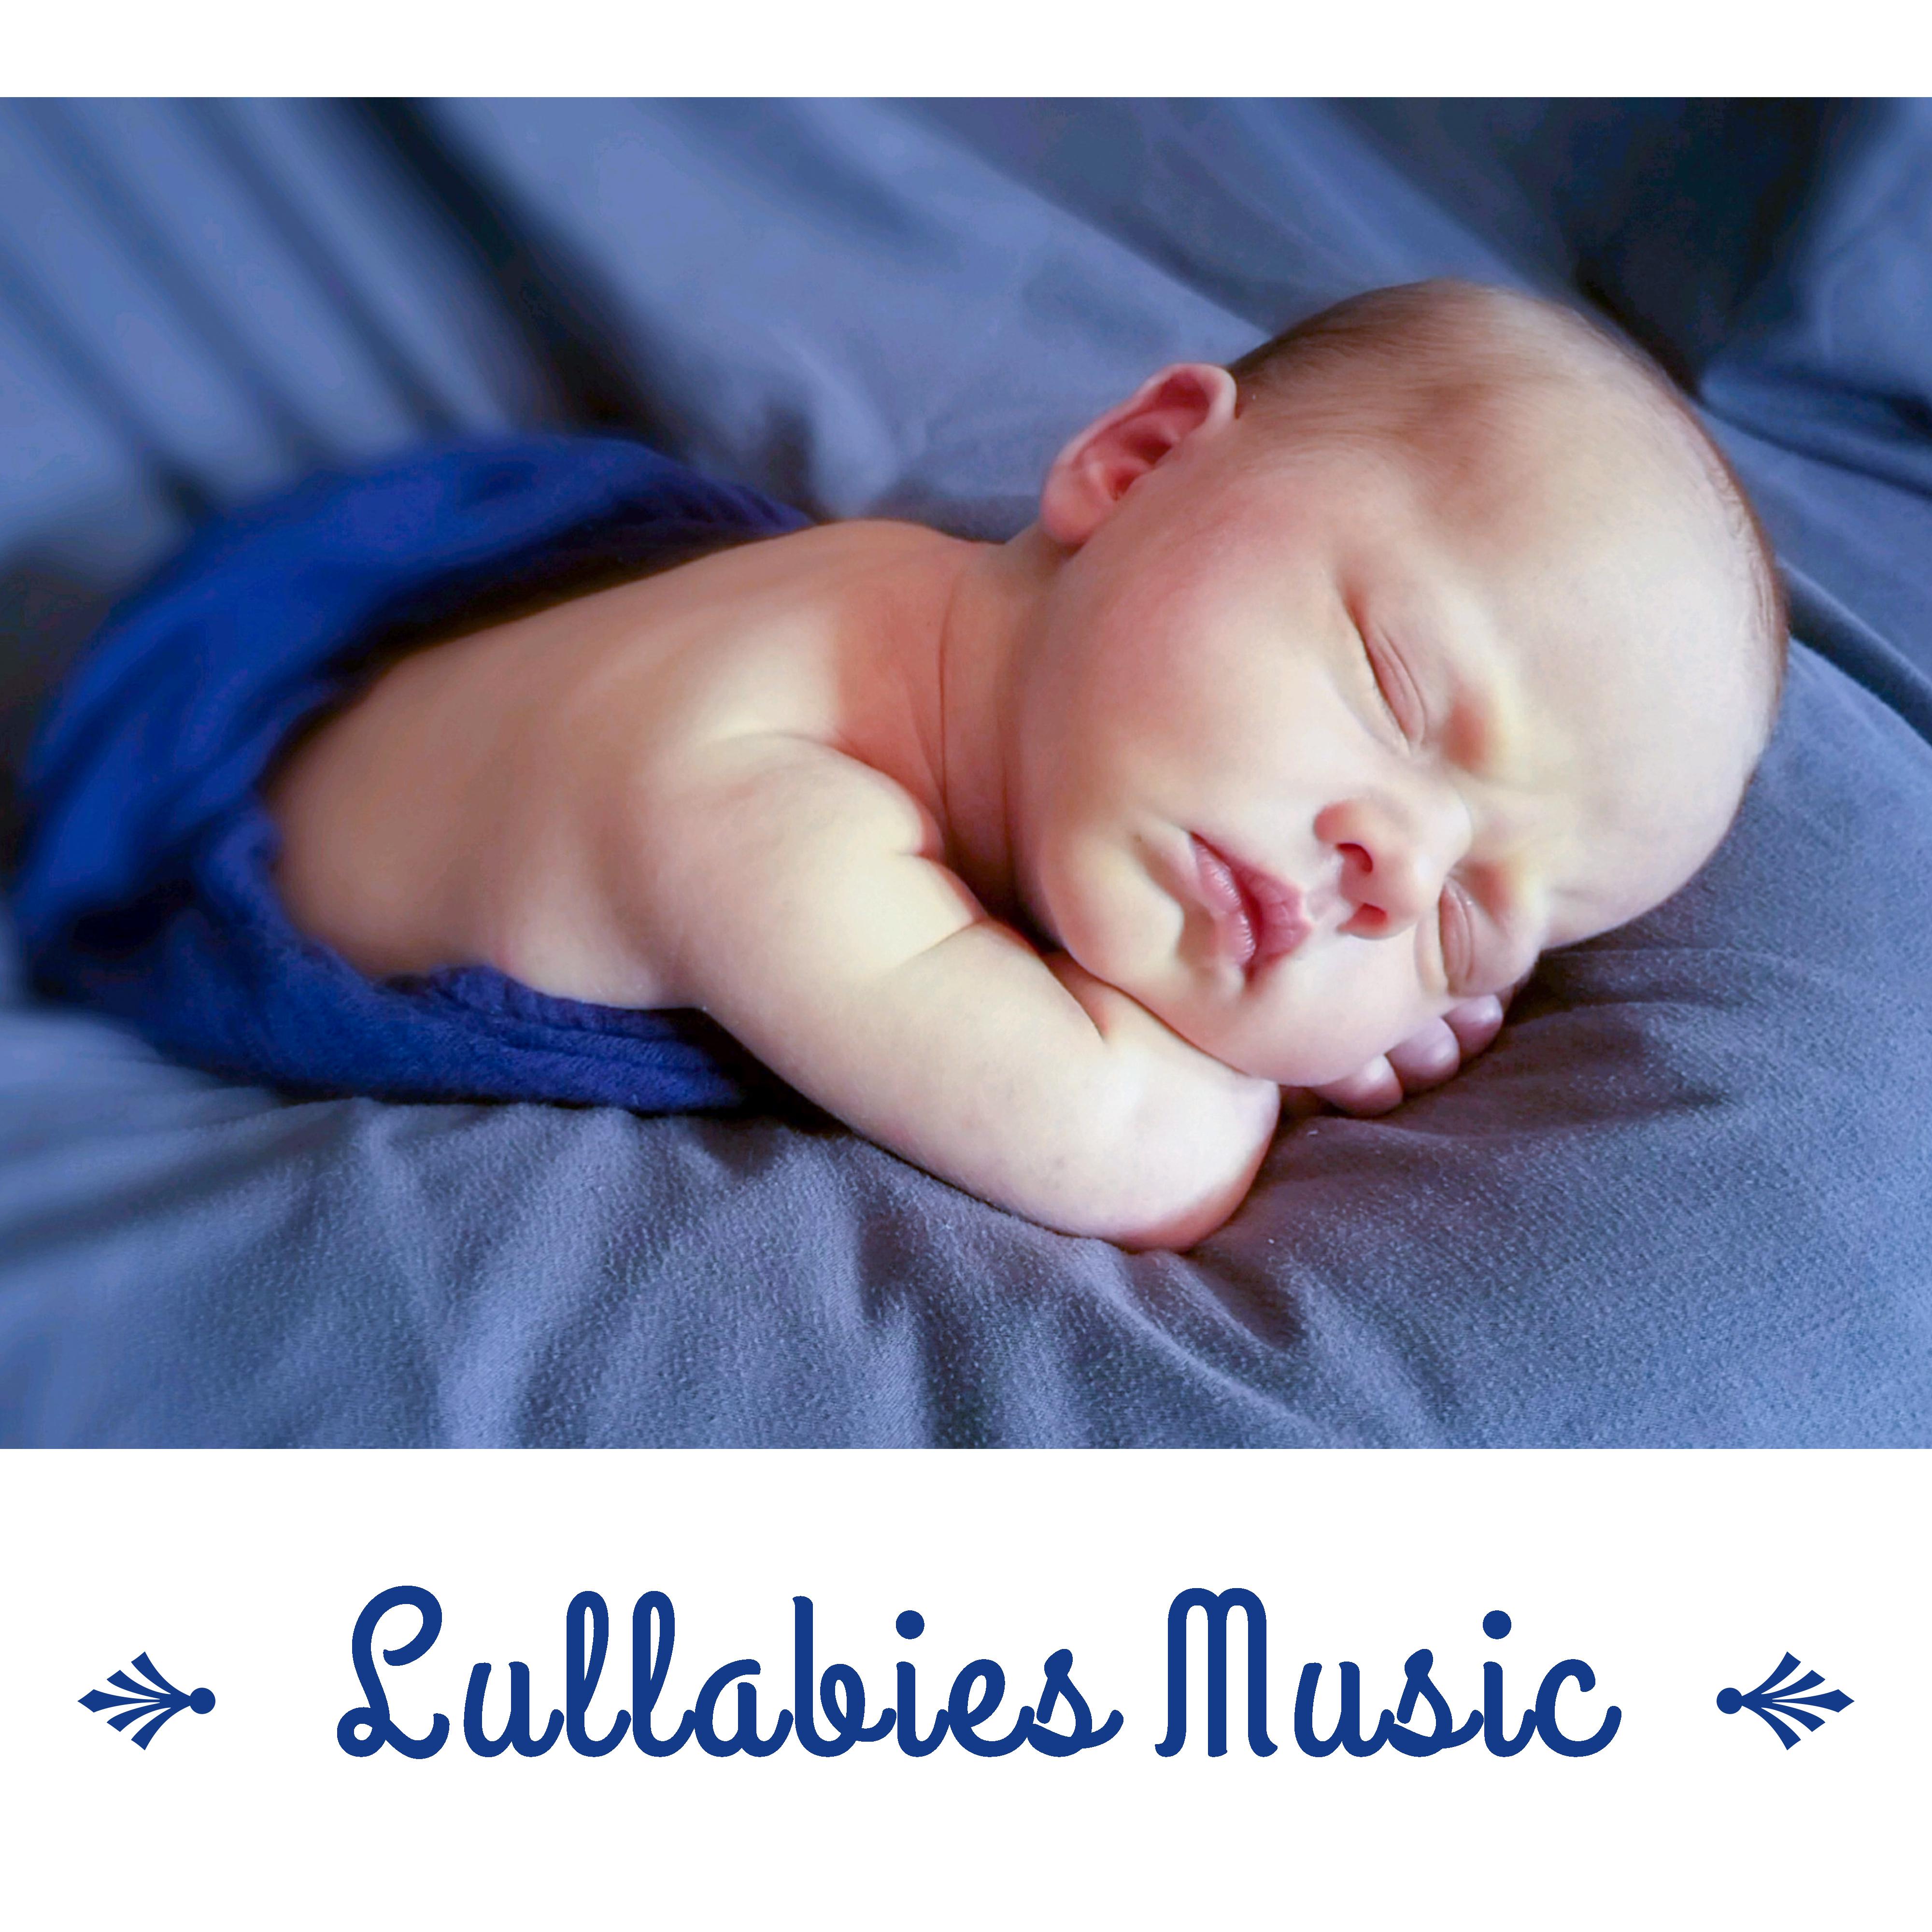 Lullabies Music  Sweet Dreams, Soft Music for Baby, Restful Sleep, Naptime, Relax for Children